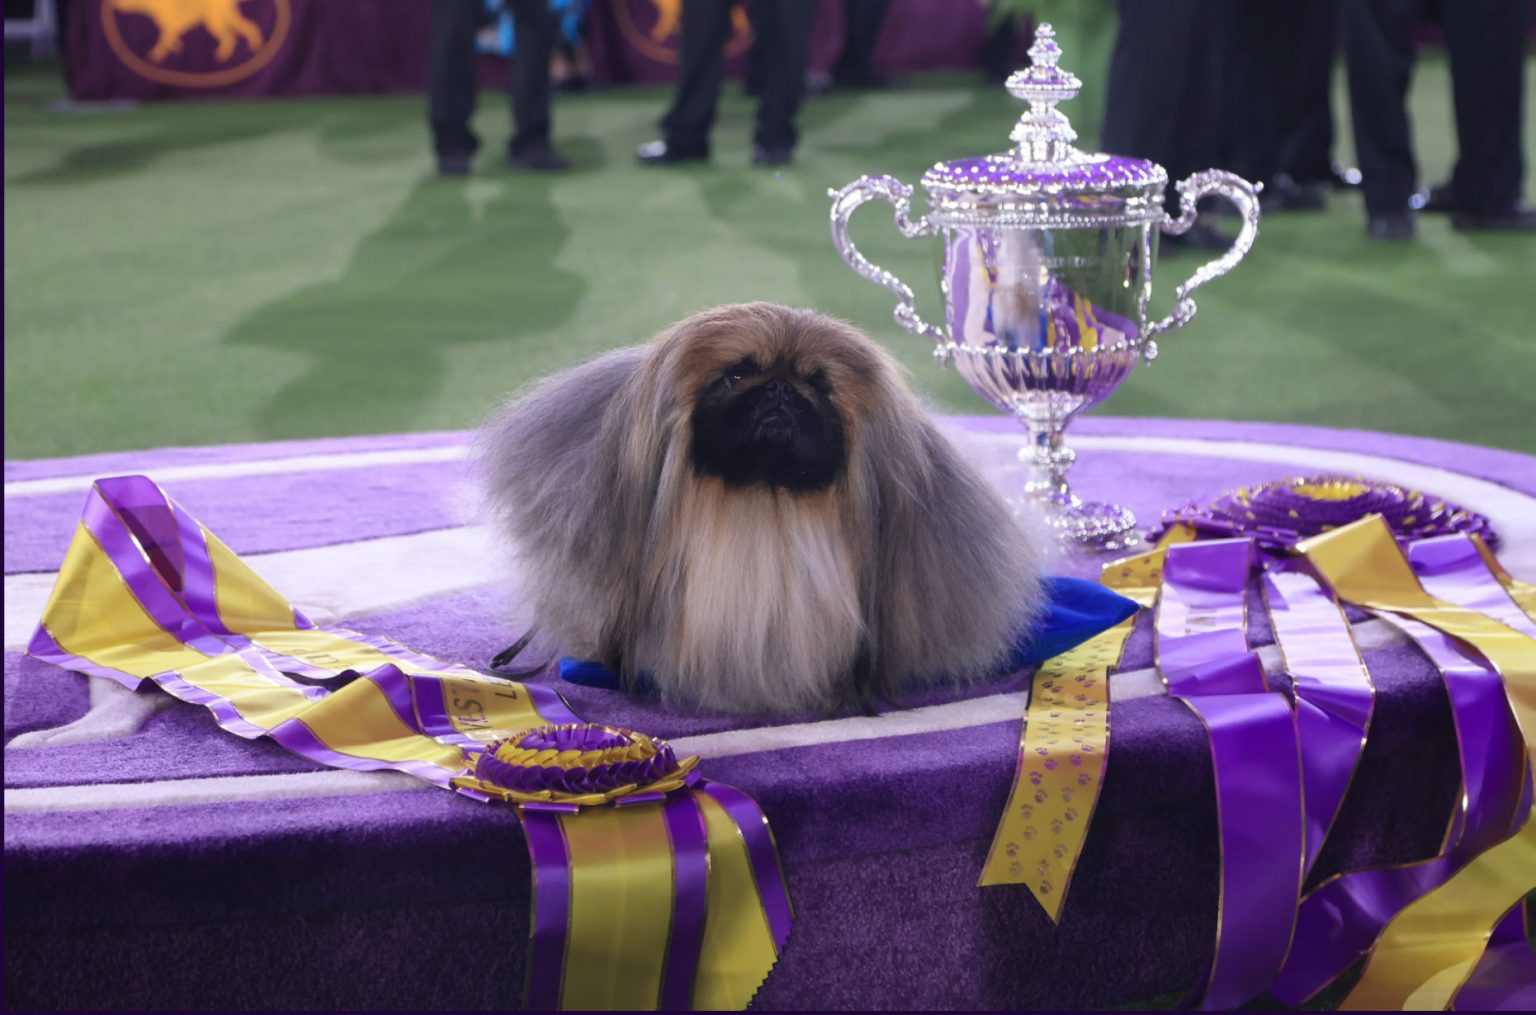 2021 Westminster Kennel Club Dog Show Pekinese wins Best in Show; see